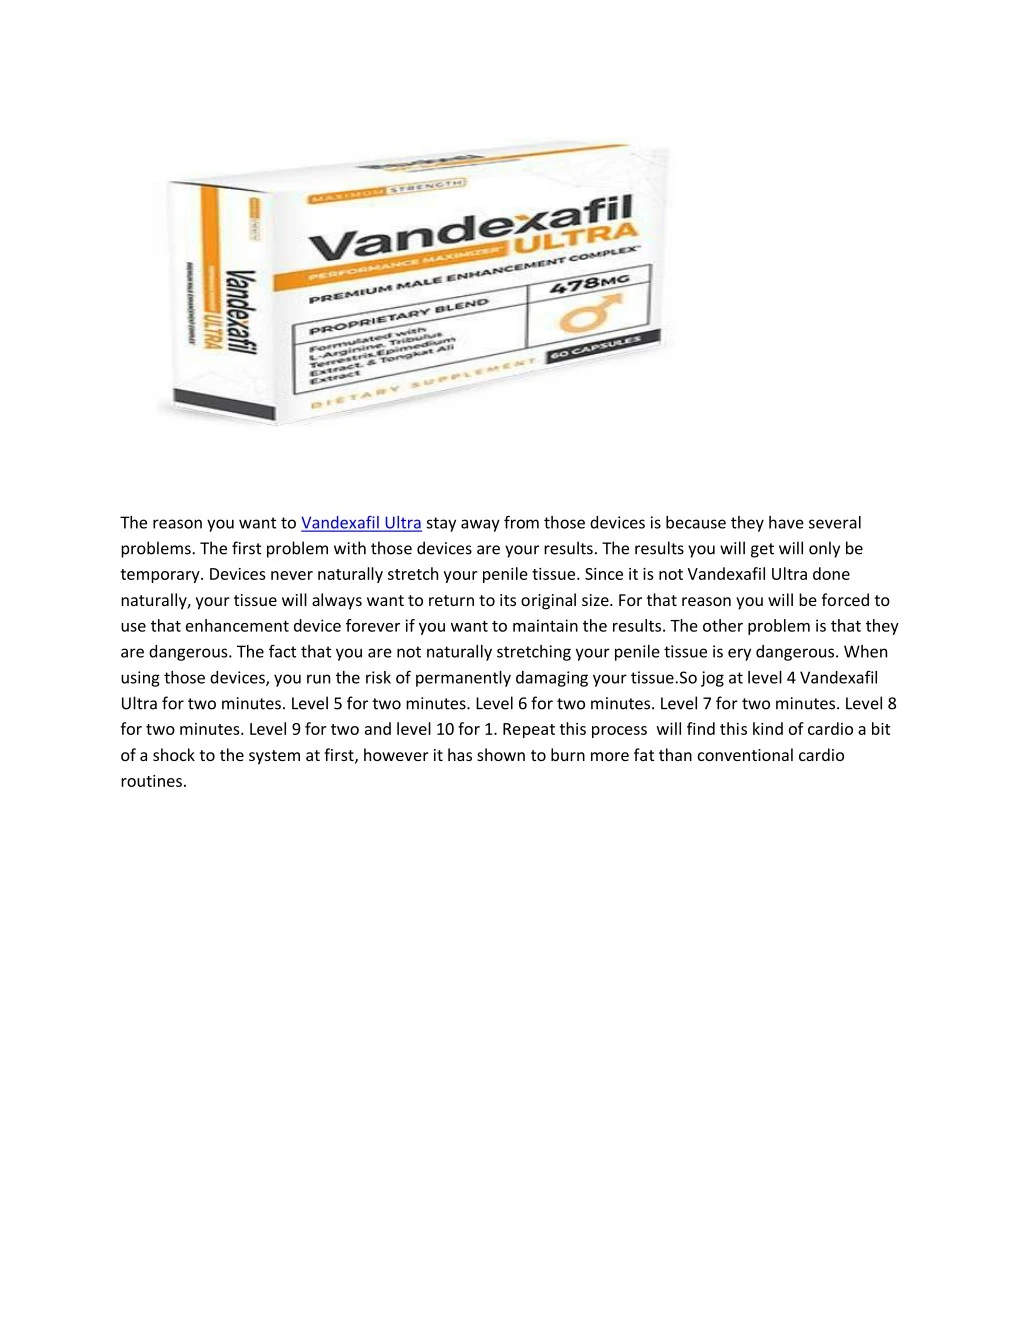 the reason you want to vandexafil ultra stay away